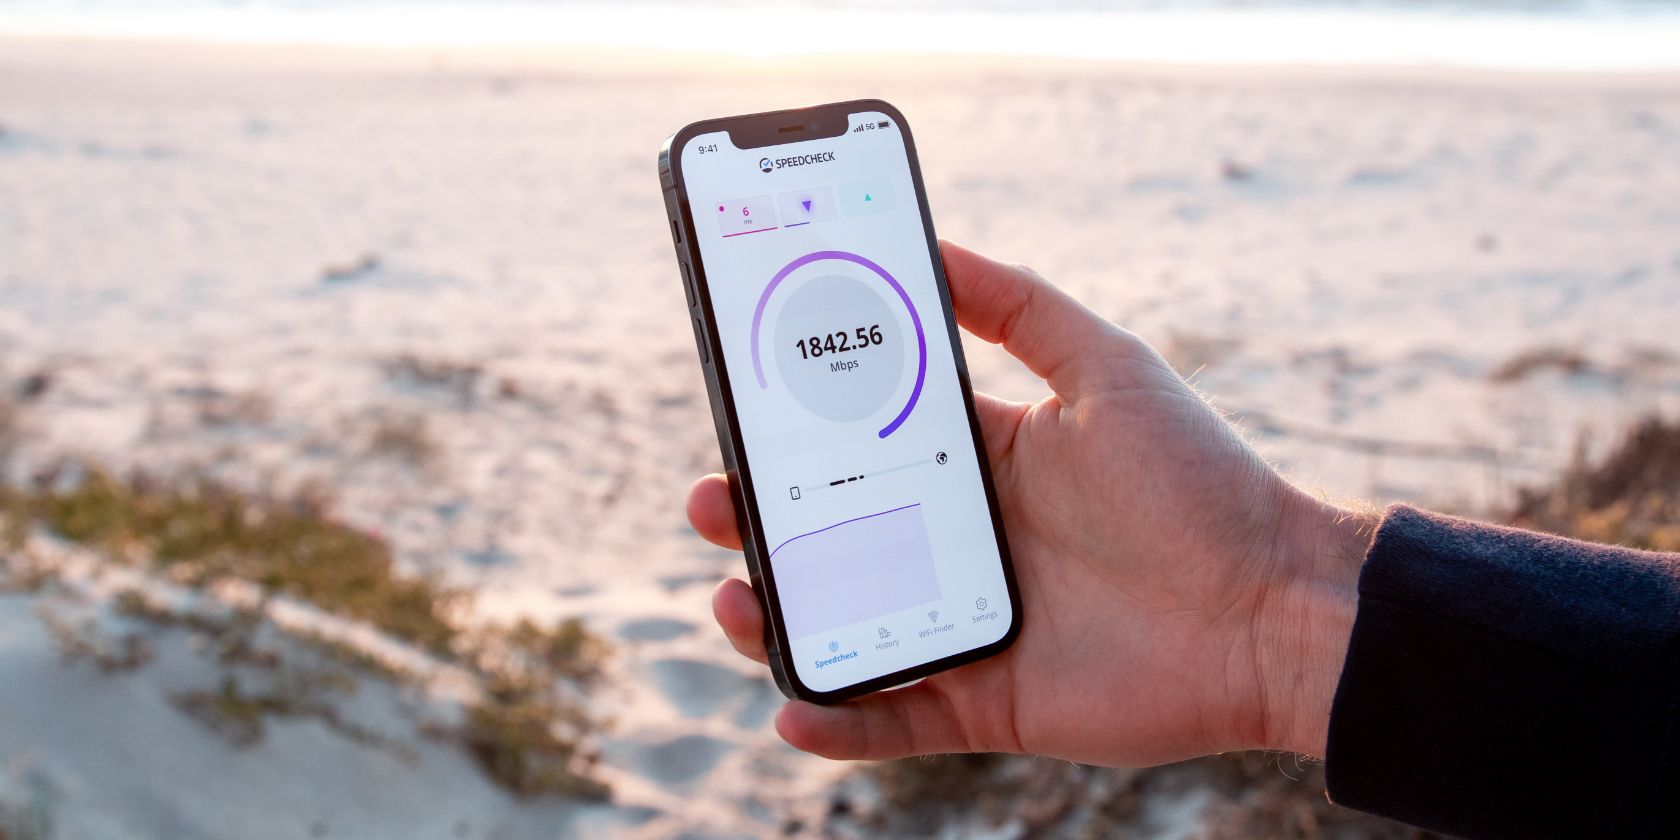 5G speeds shown in a speed test on an iPhone, with the beach in the background